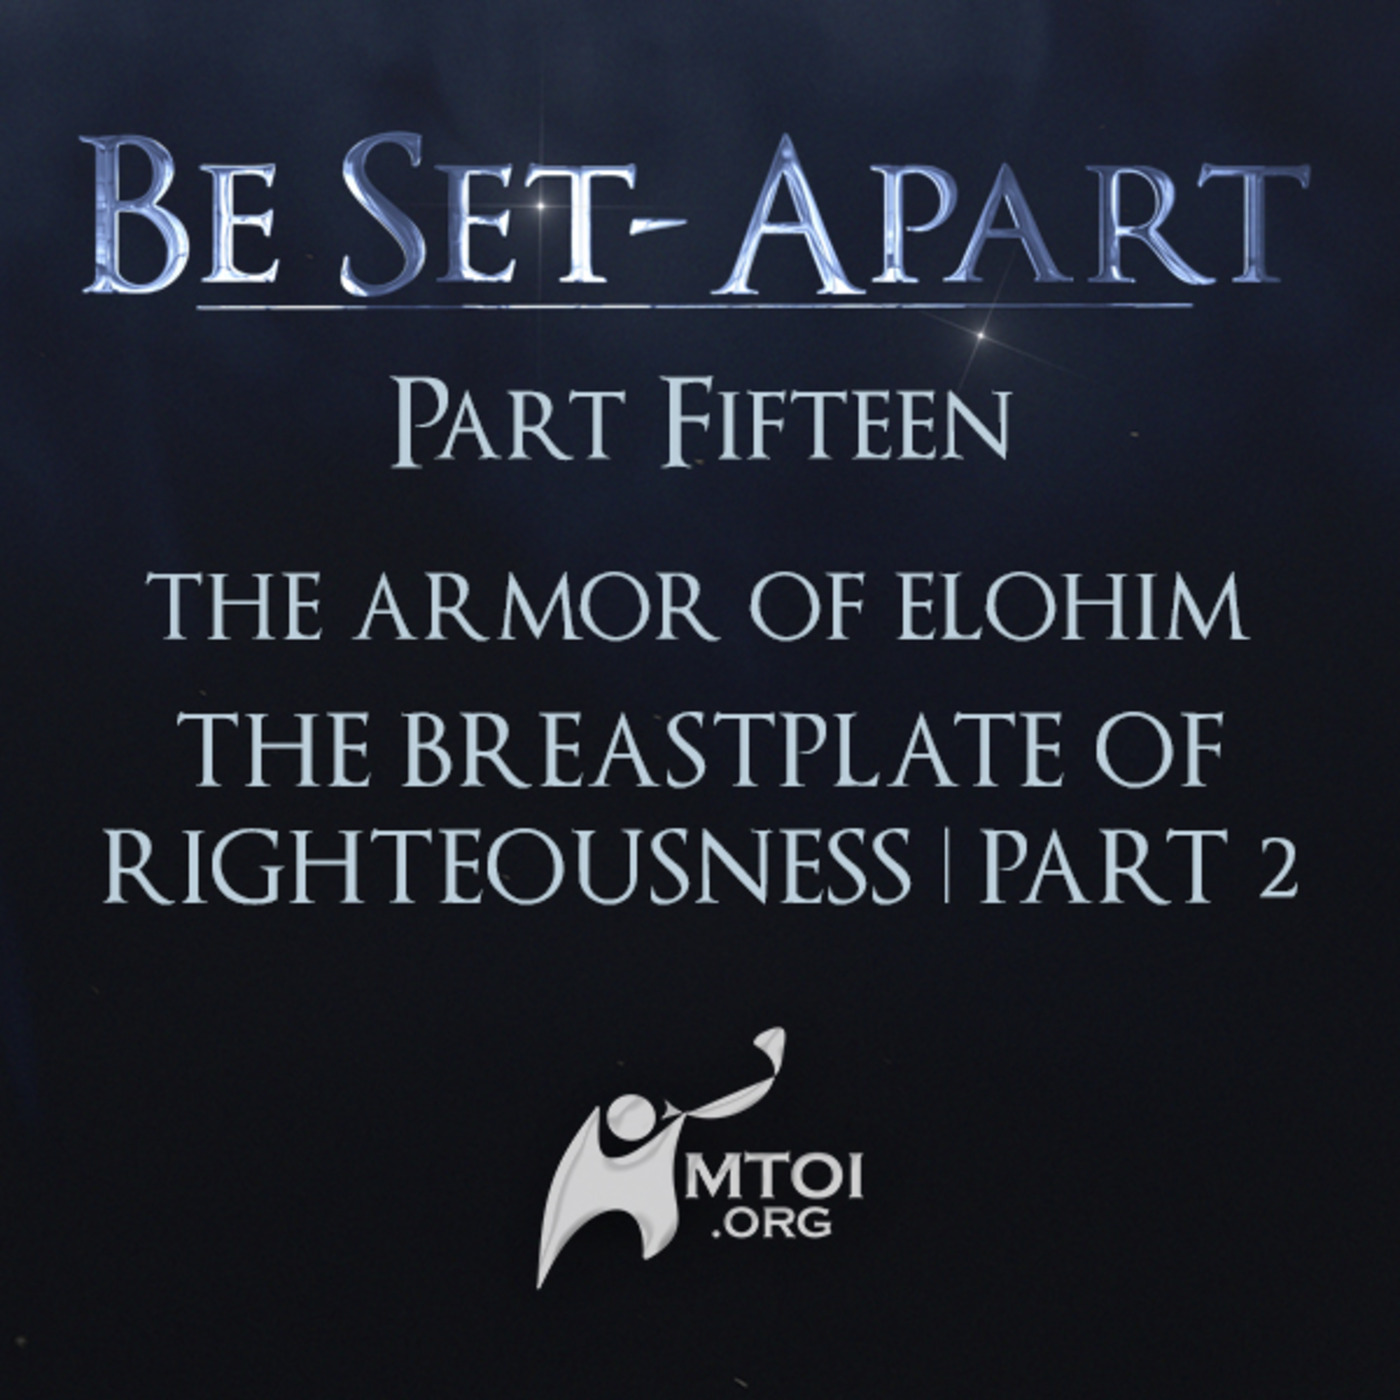 Episode 793: Be Set-Apart | Part Fifteen | Exploring Ephesians | The Breastplate of Righteousness Part 2